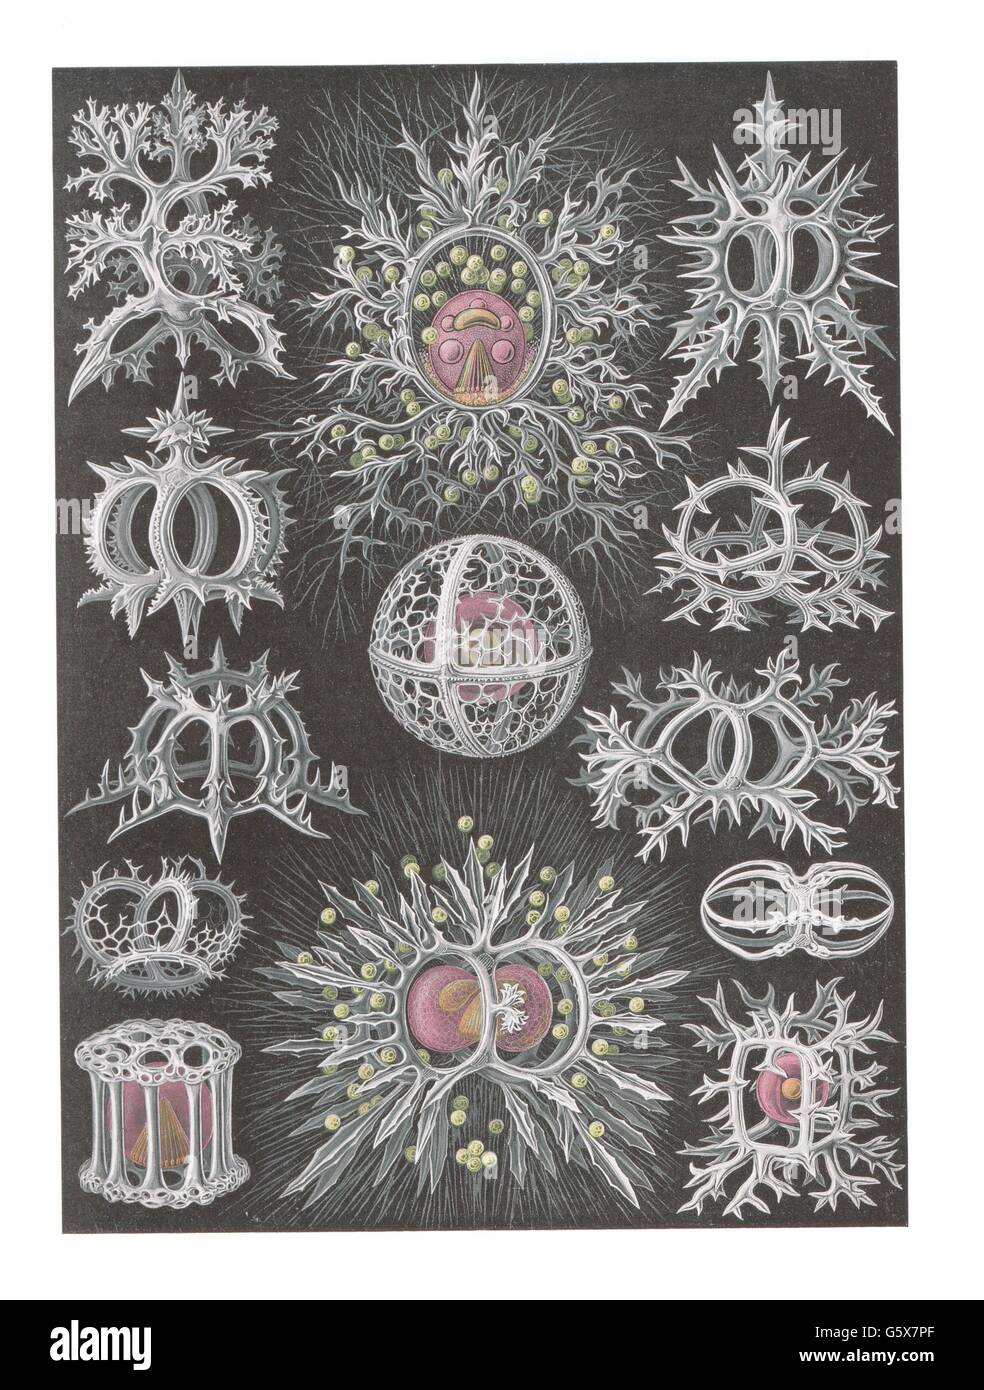 zoologie / Tiere, stephoidea, Farblithographie, aus: Ernst Haeckel, 'Kunstformen der Natur', Leipzig - Wien, 1899 - 1904, Additional-Rights-Clearences-not available Stockfoto